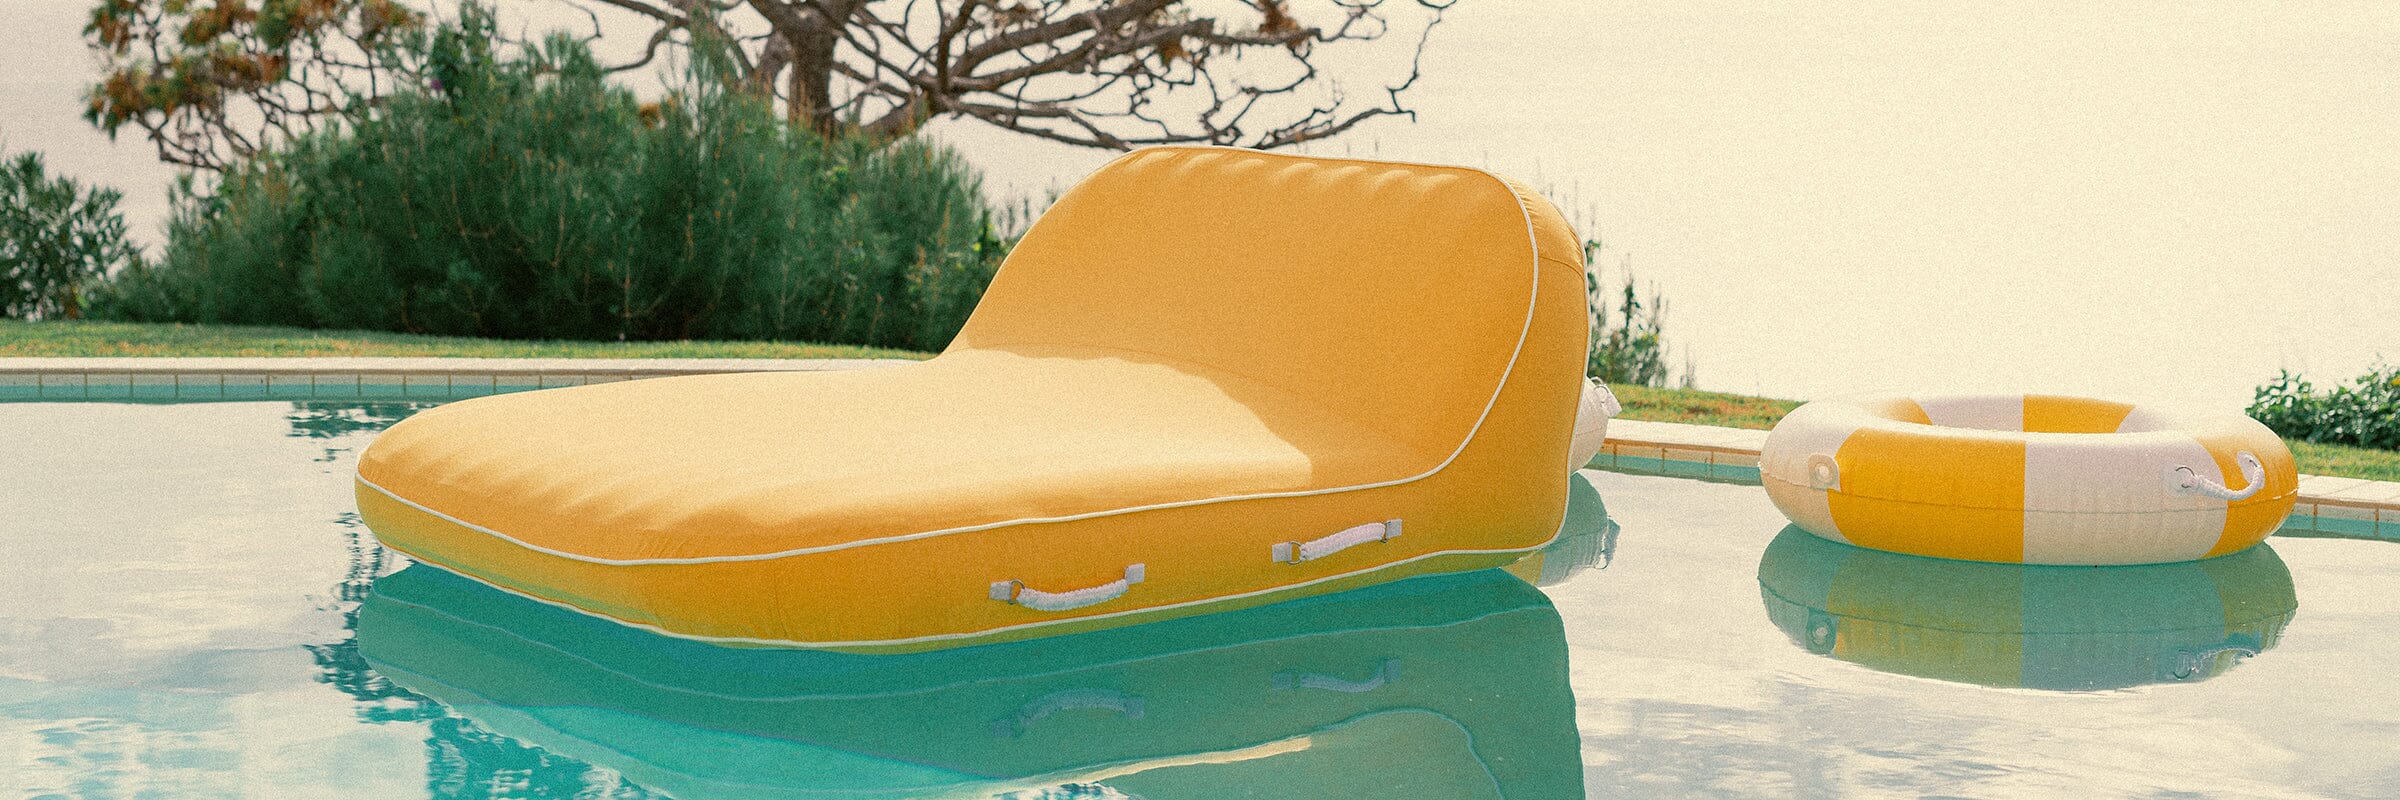 The XL Pool Lounger